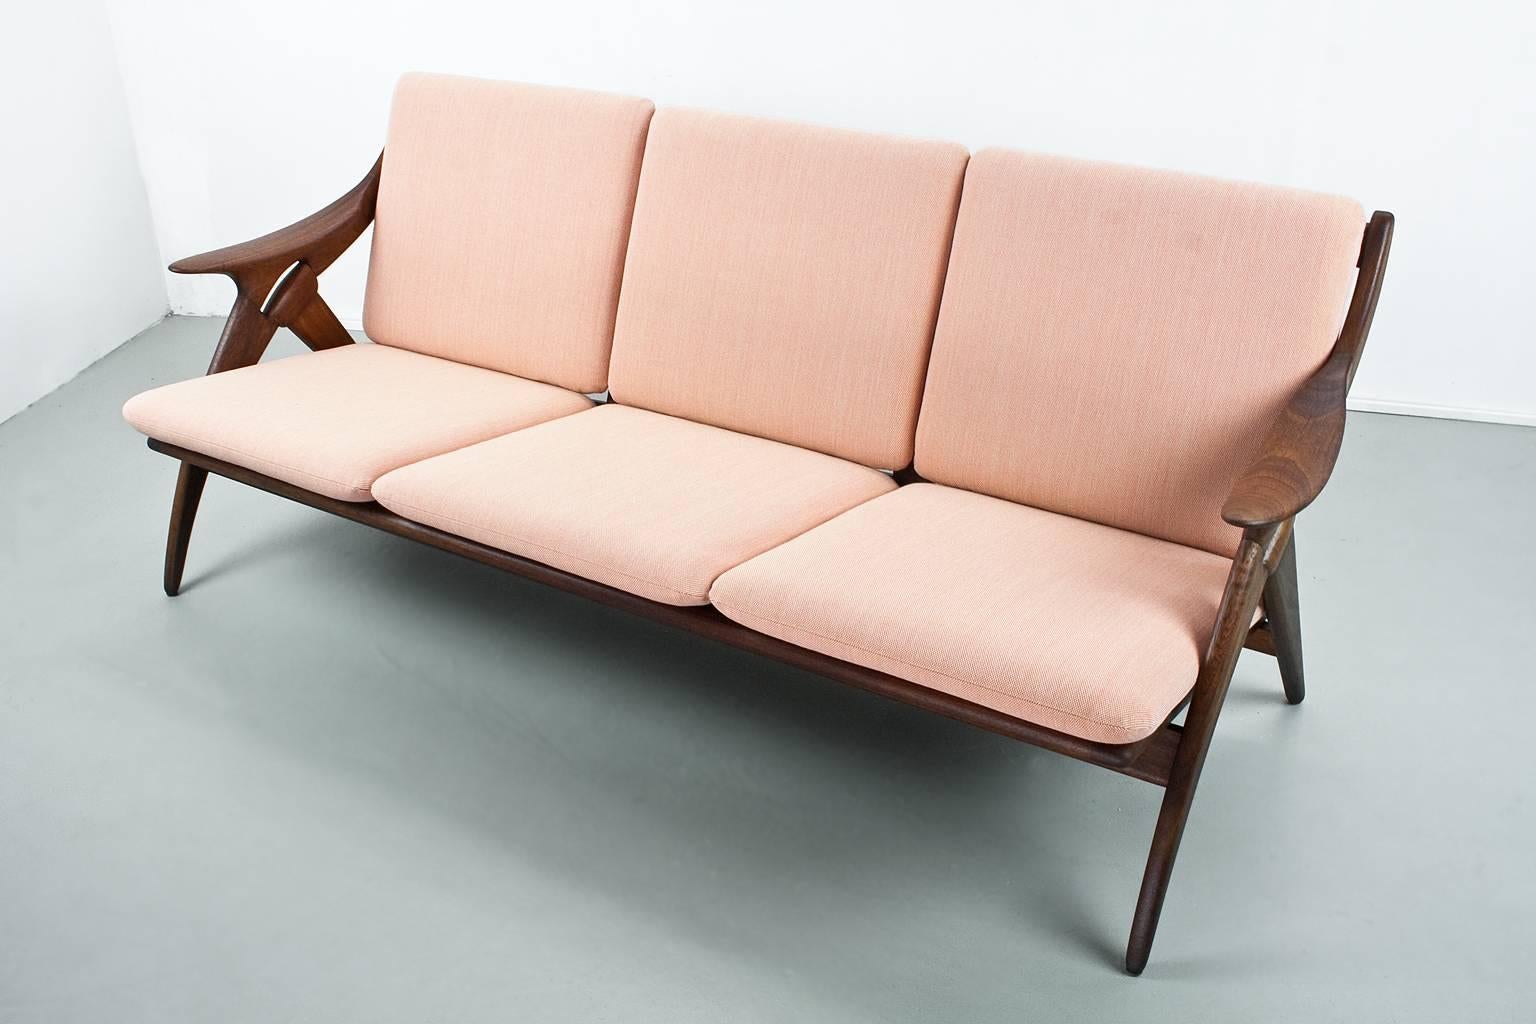 Elegantly constructed sofa in Modern Scandinavian style produced by Dutch manufacturer De Ster Gelderland during the 1960s. The typically shaped sides of the design are loosely based on a (rope) knot, giving the model its name: the Knot.
The solid